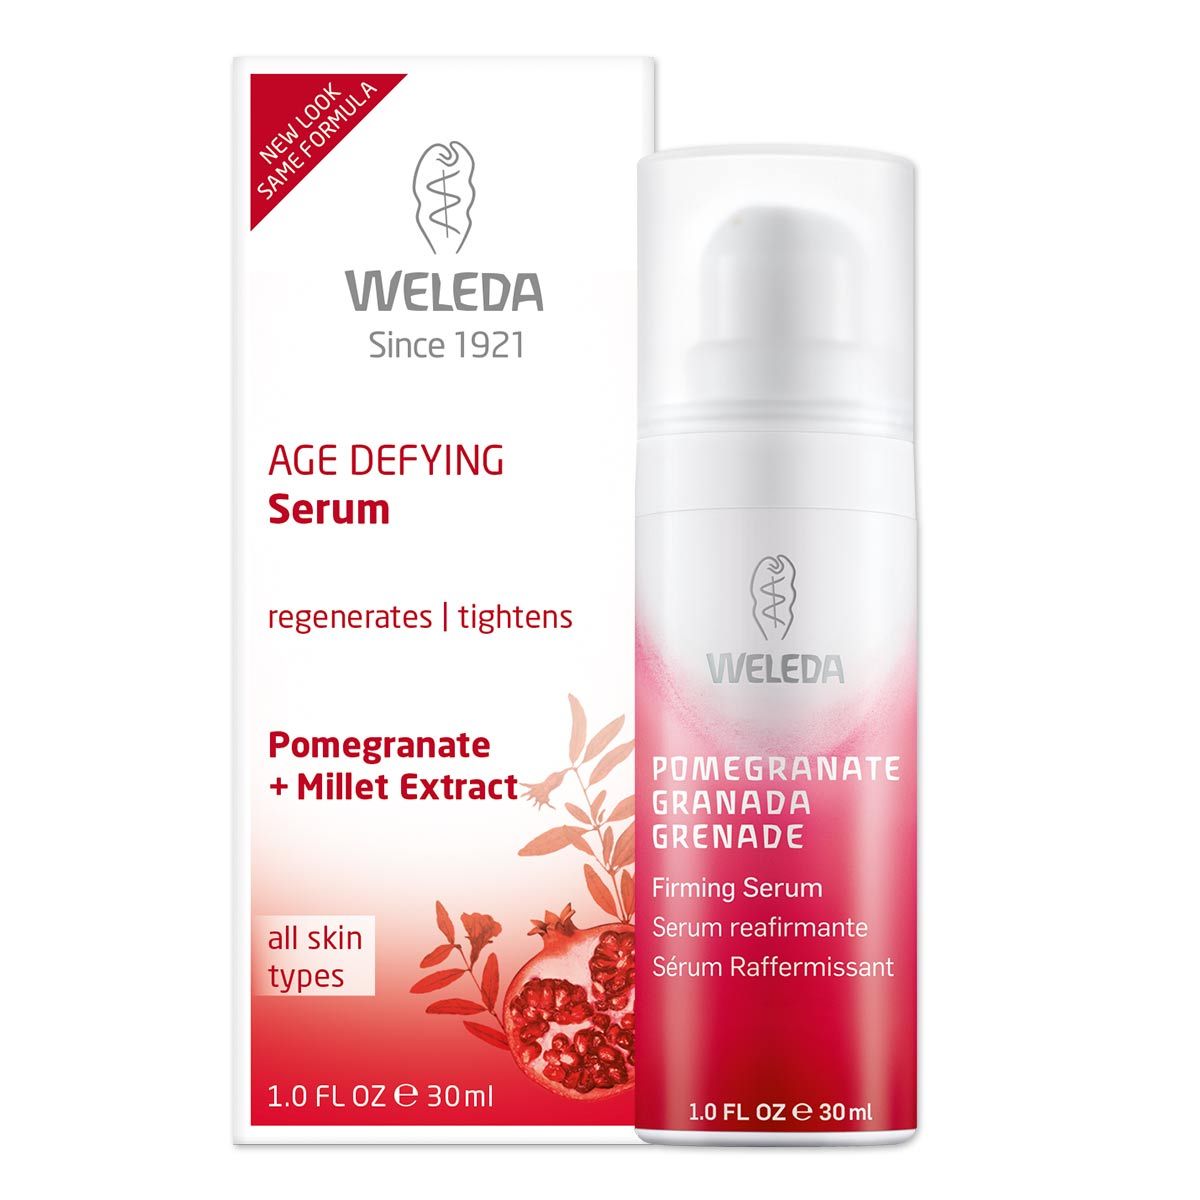 Primary image of Pomegranate Firming Serum